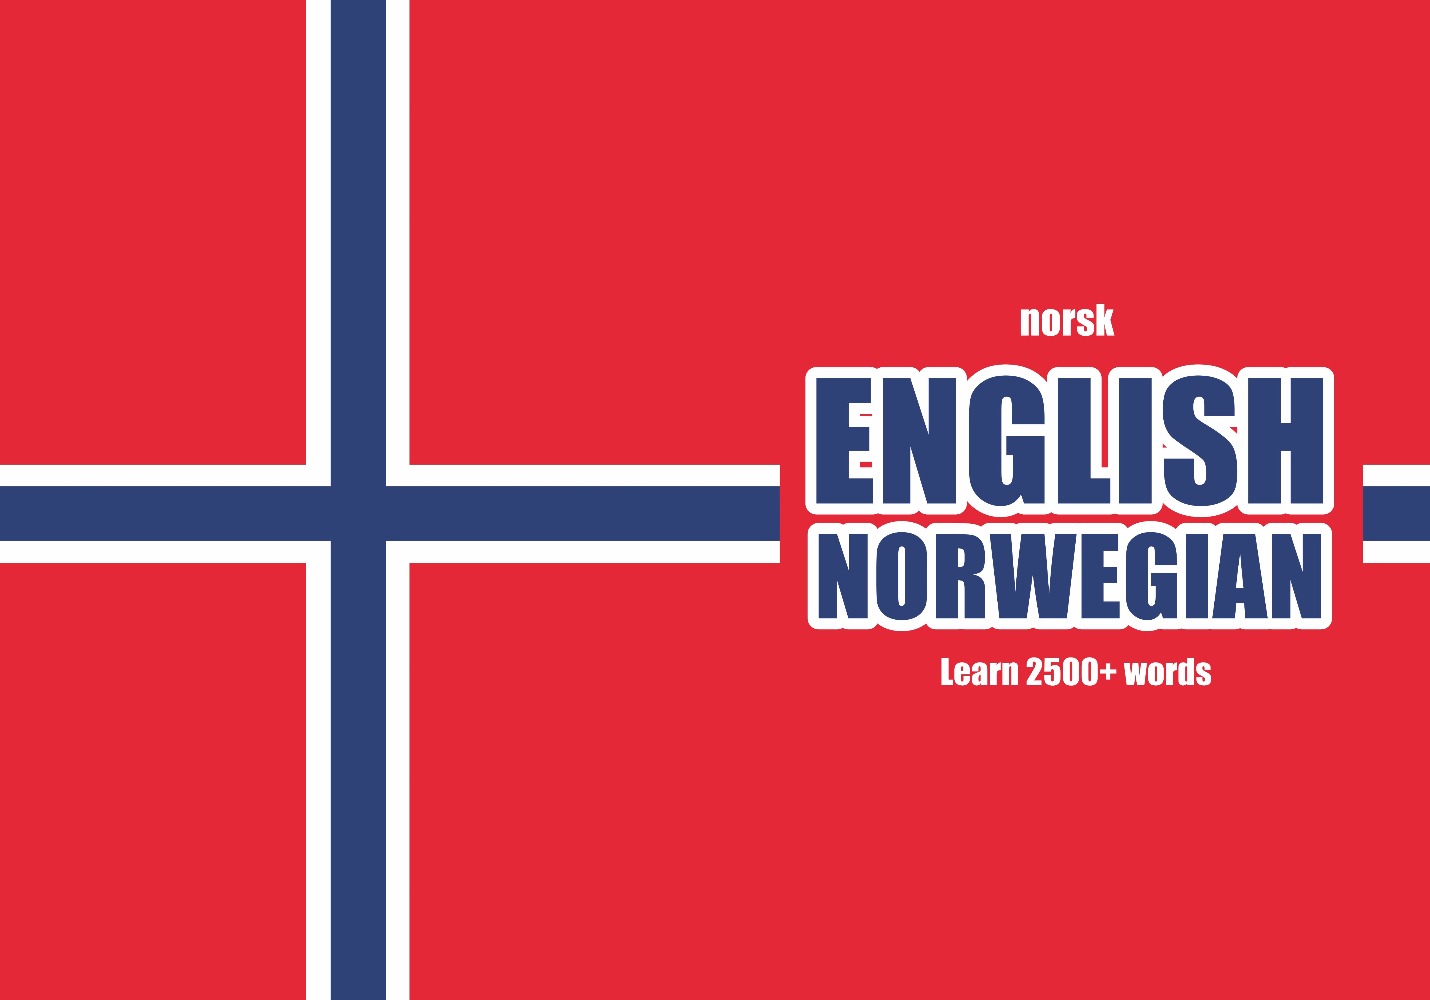 Norwegian language learning notebook cover